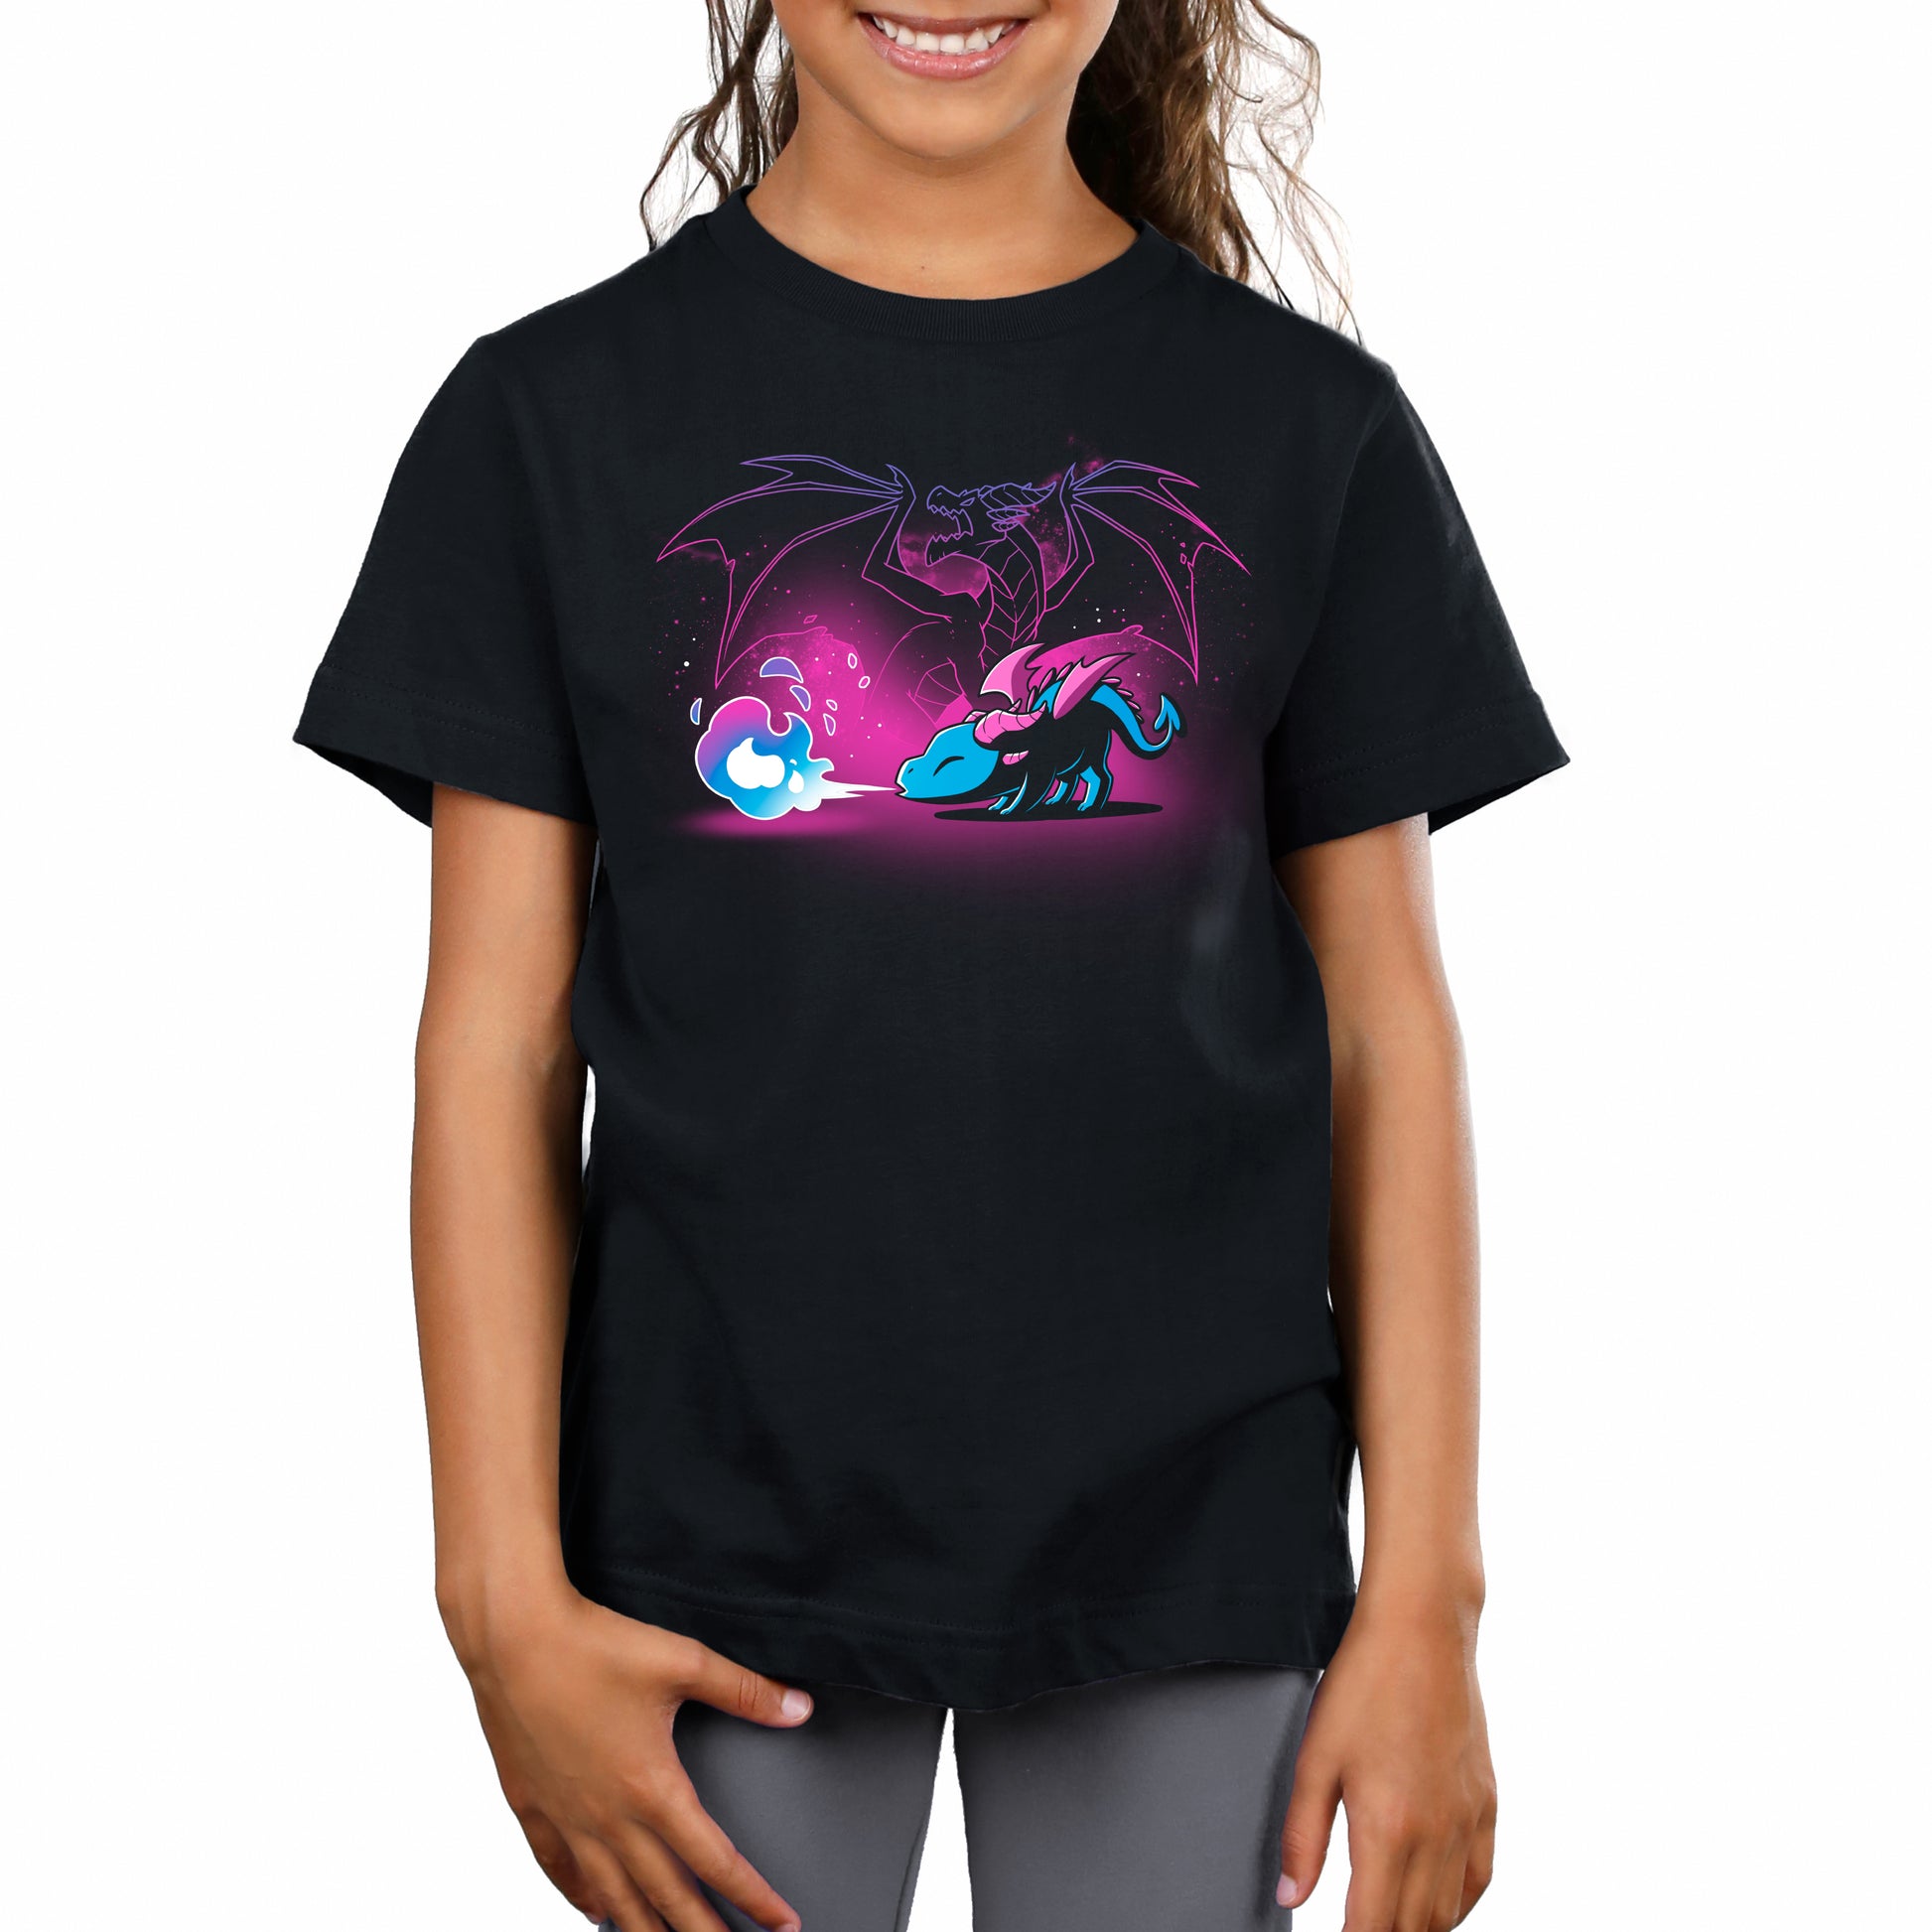 A girl with aspirations wearing a black t-shirt with the Spirit of the Dragon from TeeTurtle at campfire night.